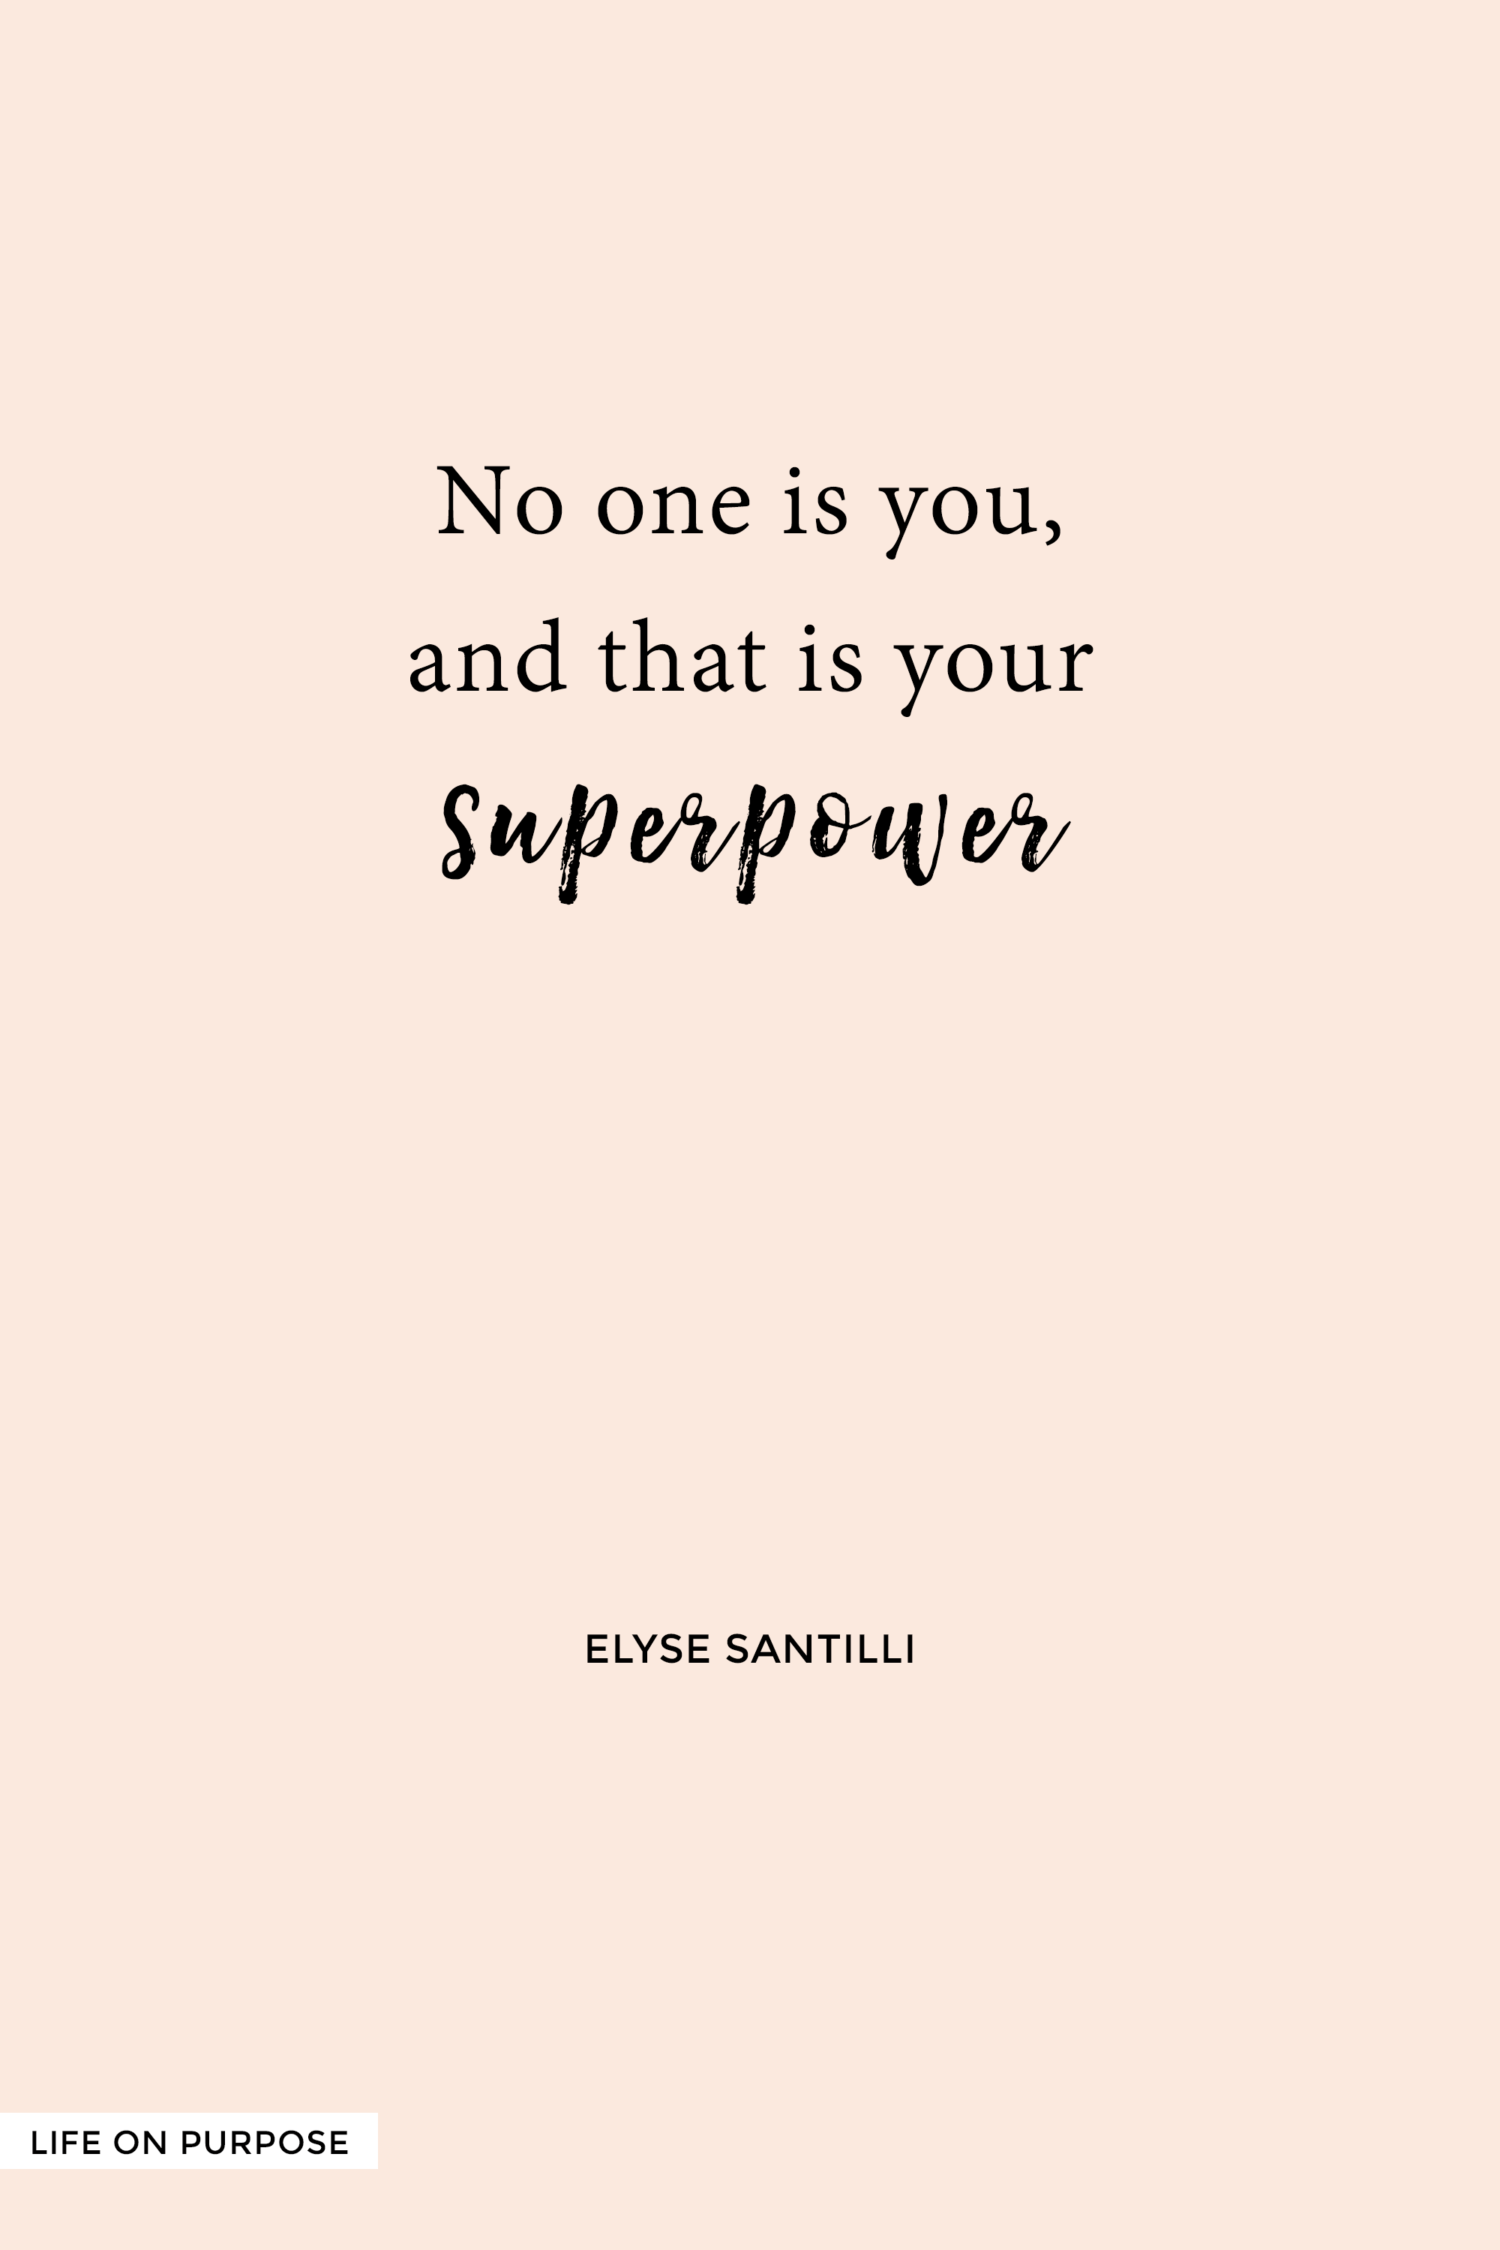 No one is you, and THAT is your superpower. 14 inspiring quotes